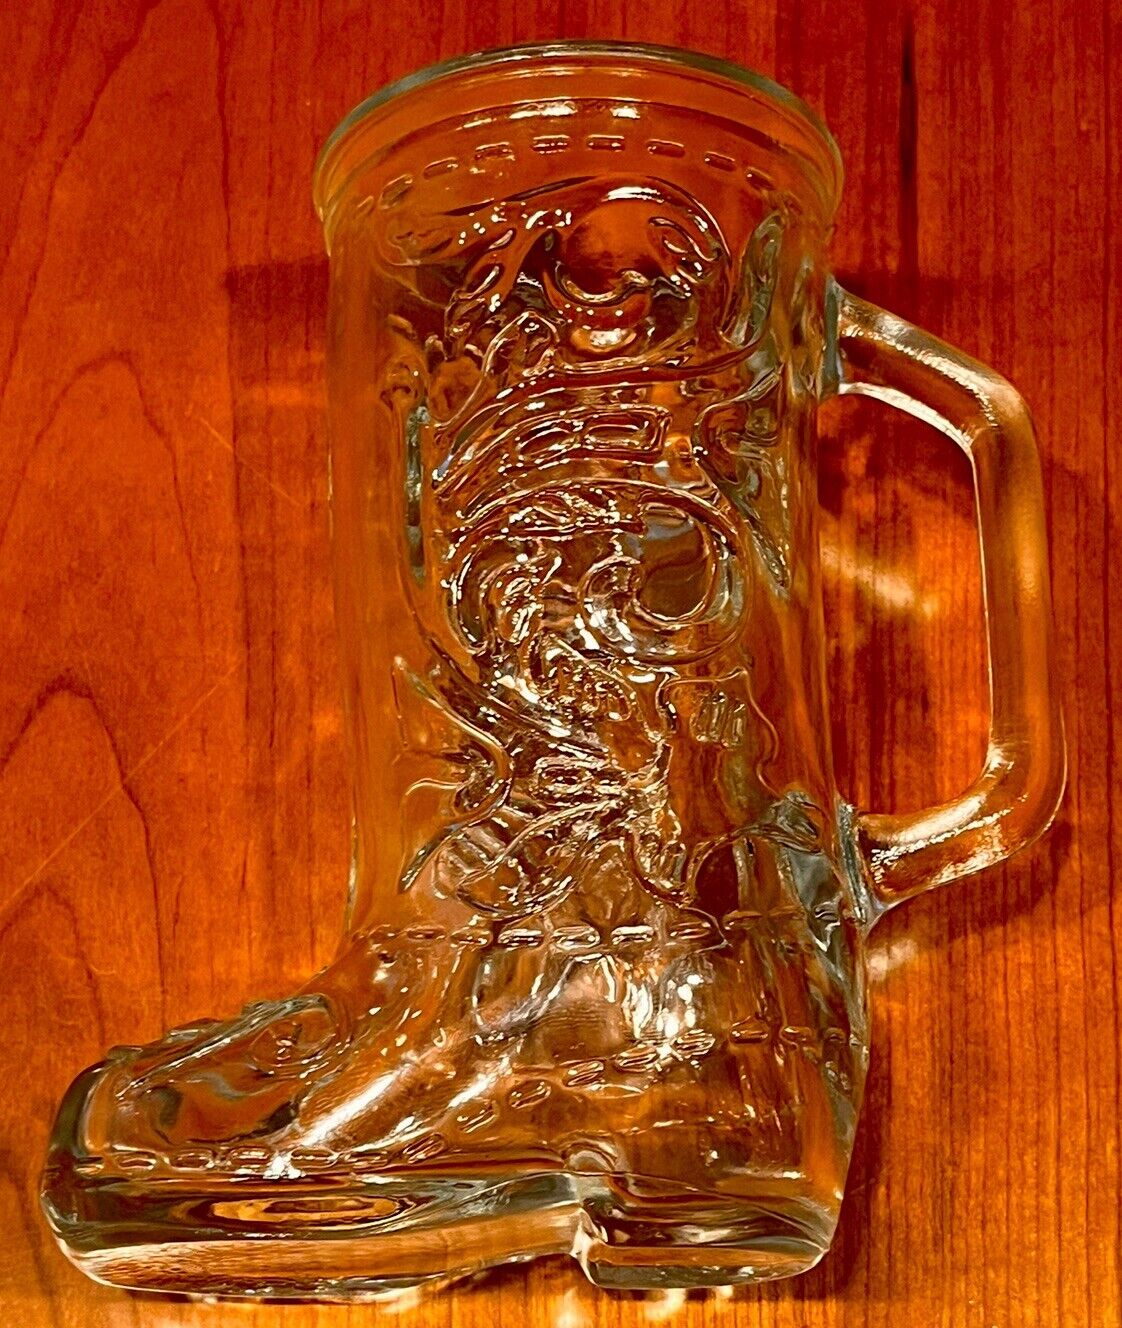 Vintage 6 Inch Clear Glass Cowboy Boot Mug, Very Clean, No Cracks Or Chips